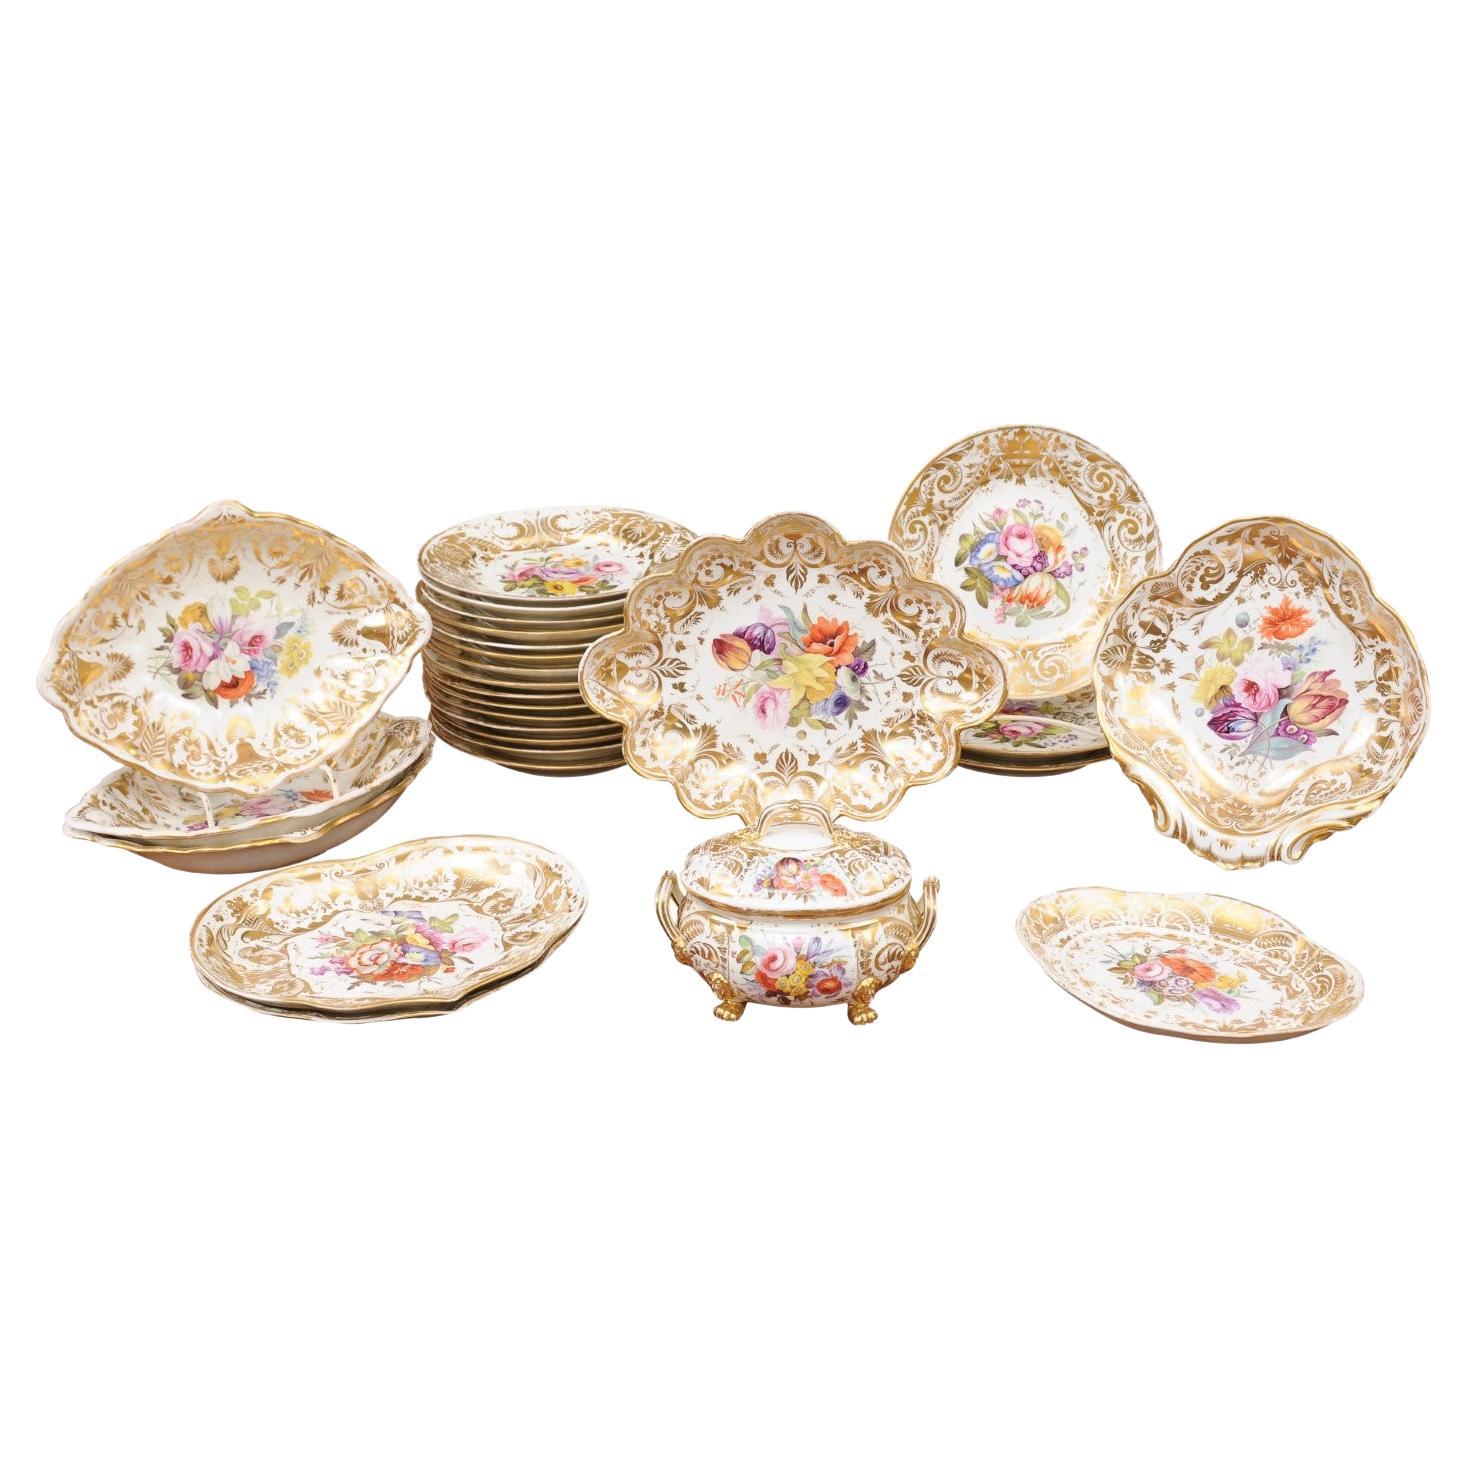 Set of Early 19th Century English Derby Porcelain Dessert Service For Sale